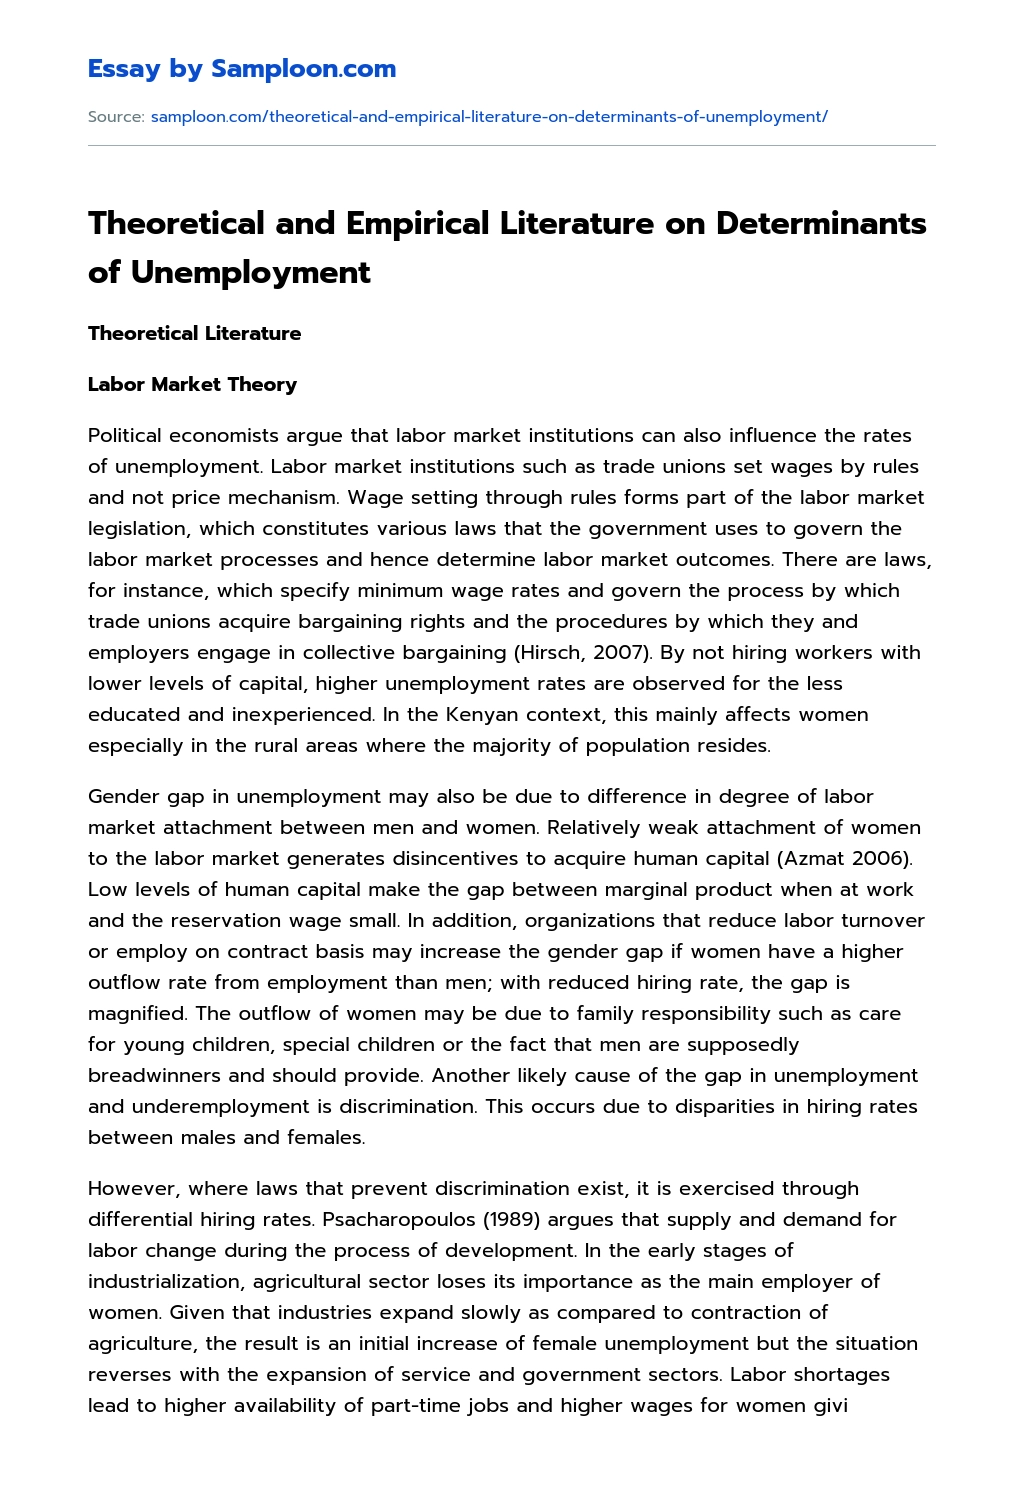 Theoretical and Empirical Literature on Determinants of Unemployment essay